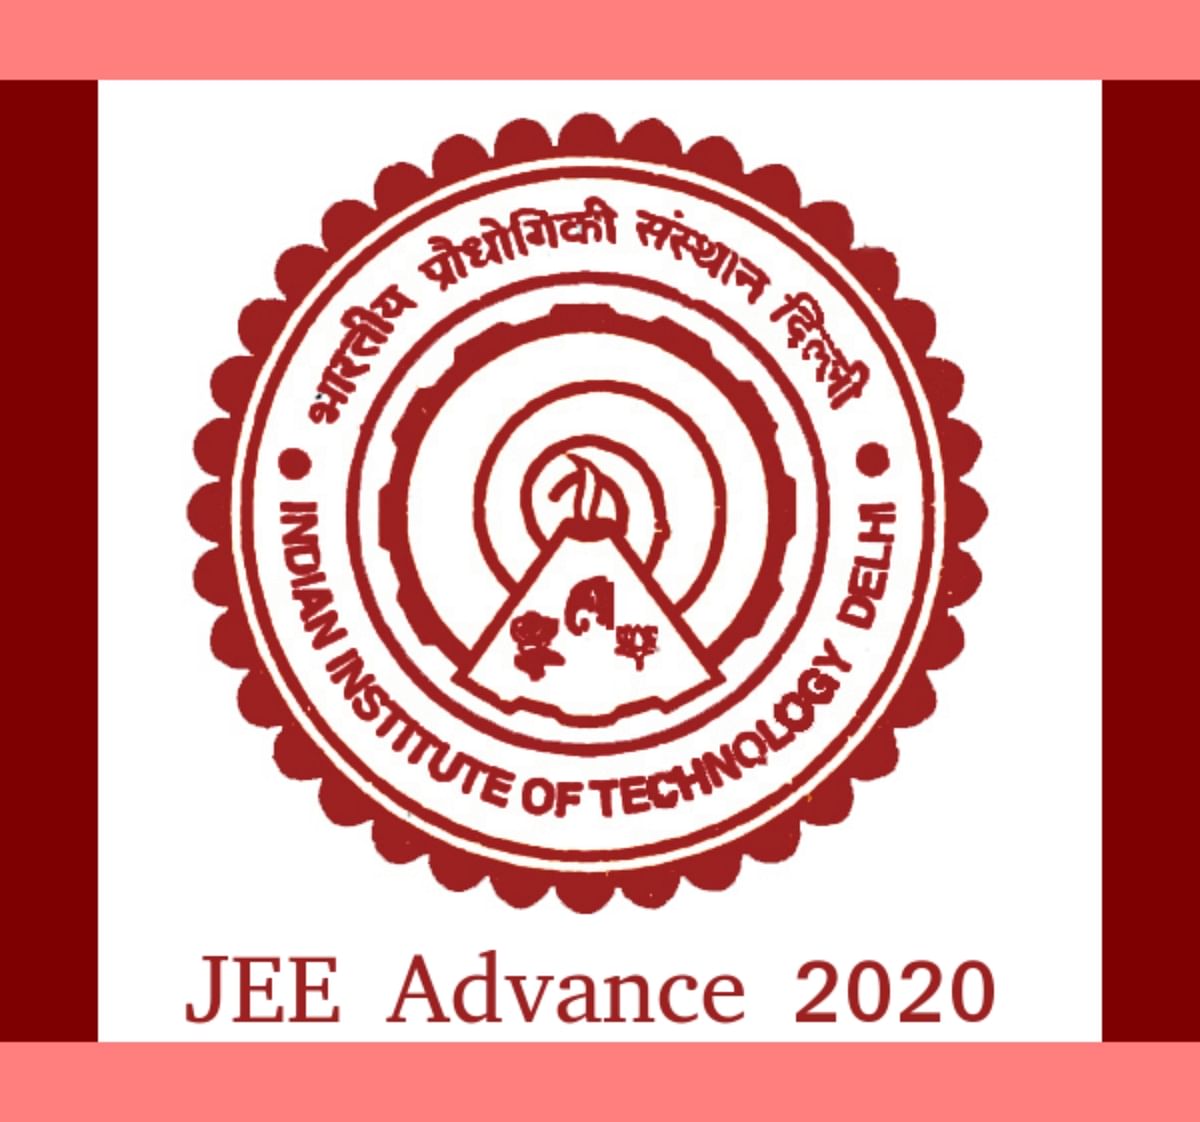 JEE Advanced Results 2020 to be Declared This Week